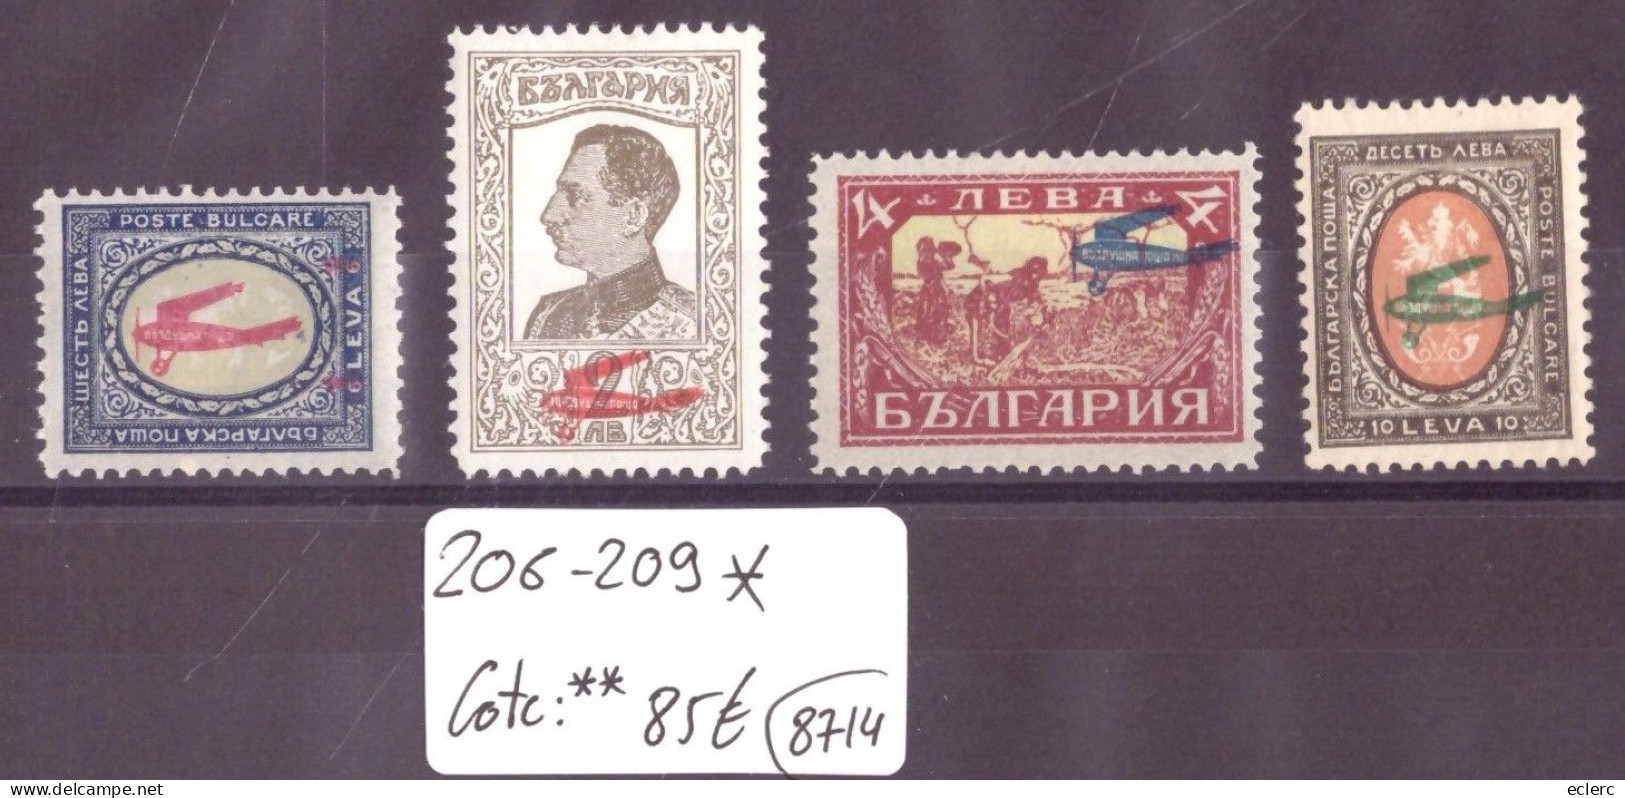 BULGARIE - No Michel 206-209 * ( NEUFS AVEC CHARNIERE )  -   COTE**: 85 €  - ( WARNING: NO PAYPAL ) - Airmail